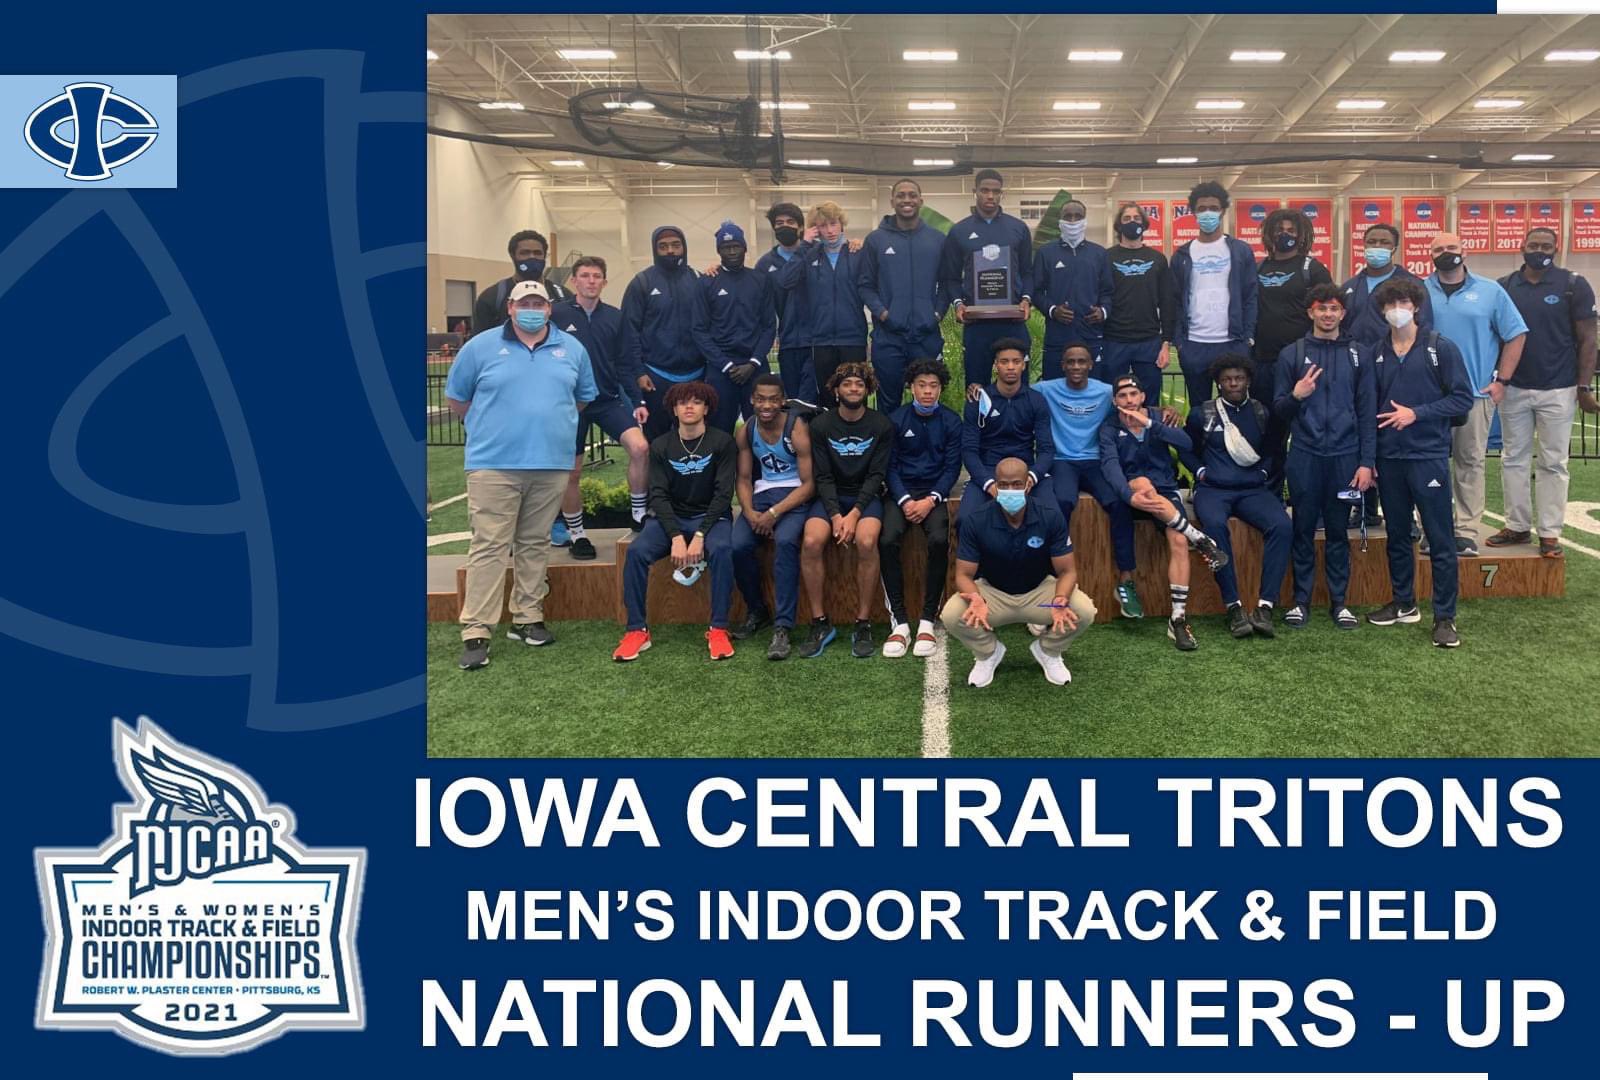 Tritons shine once again at nationals